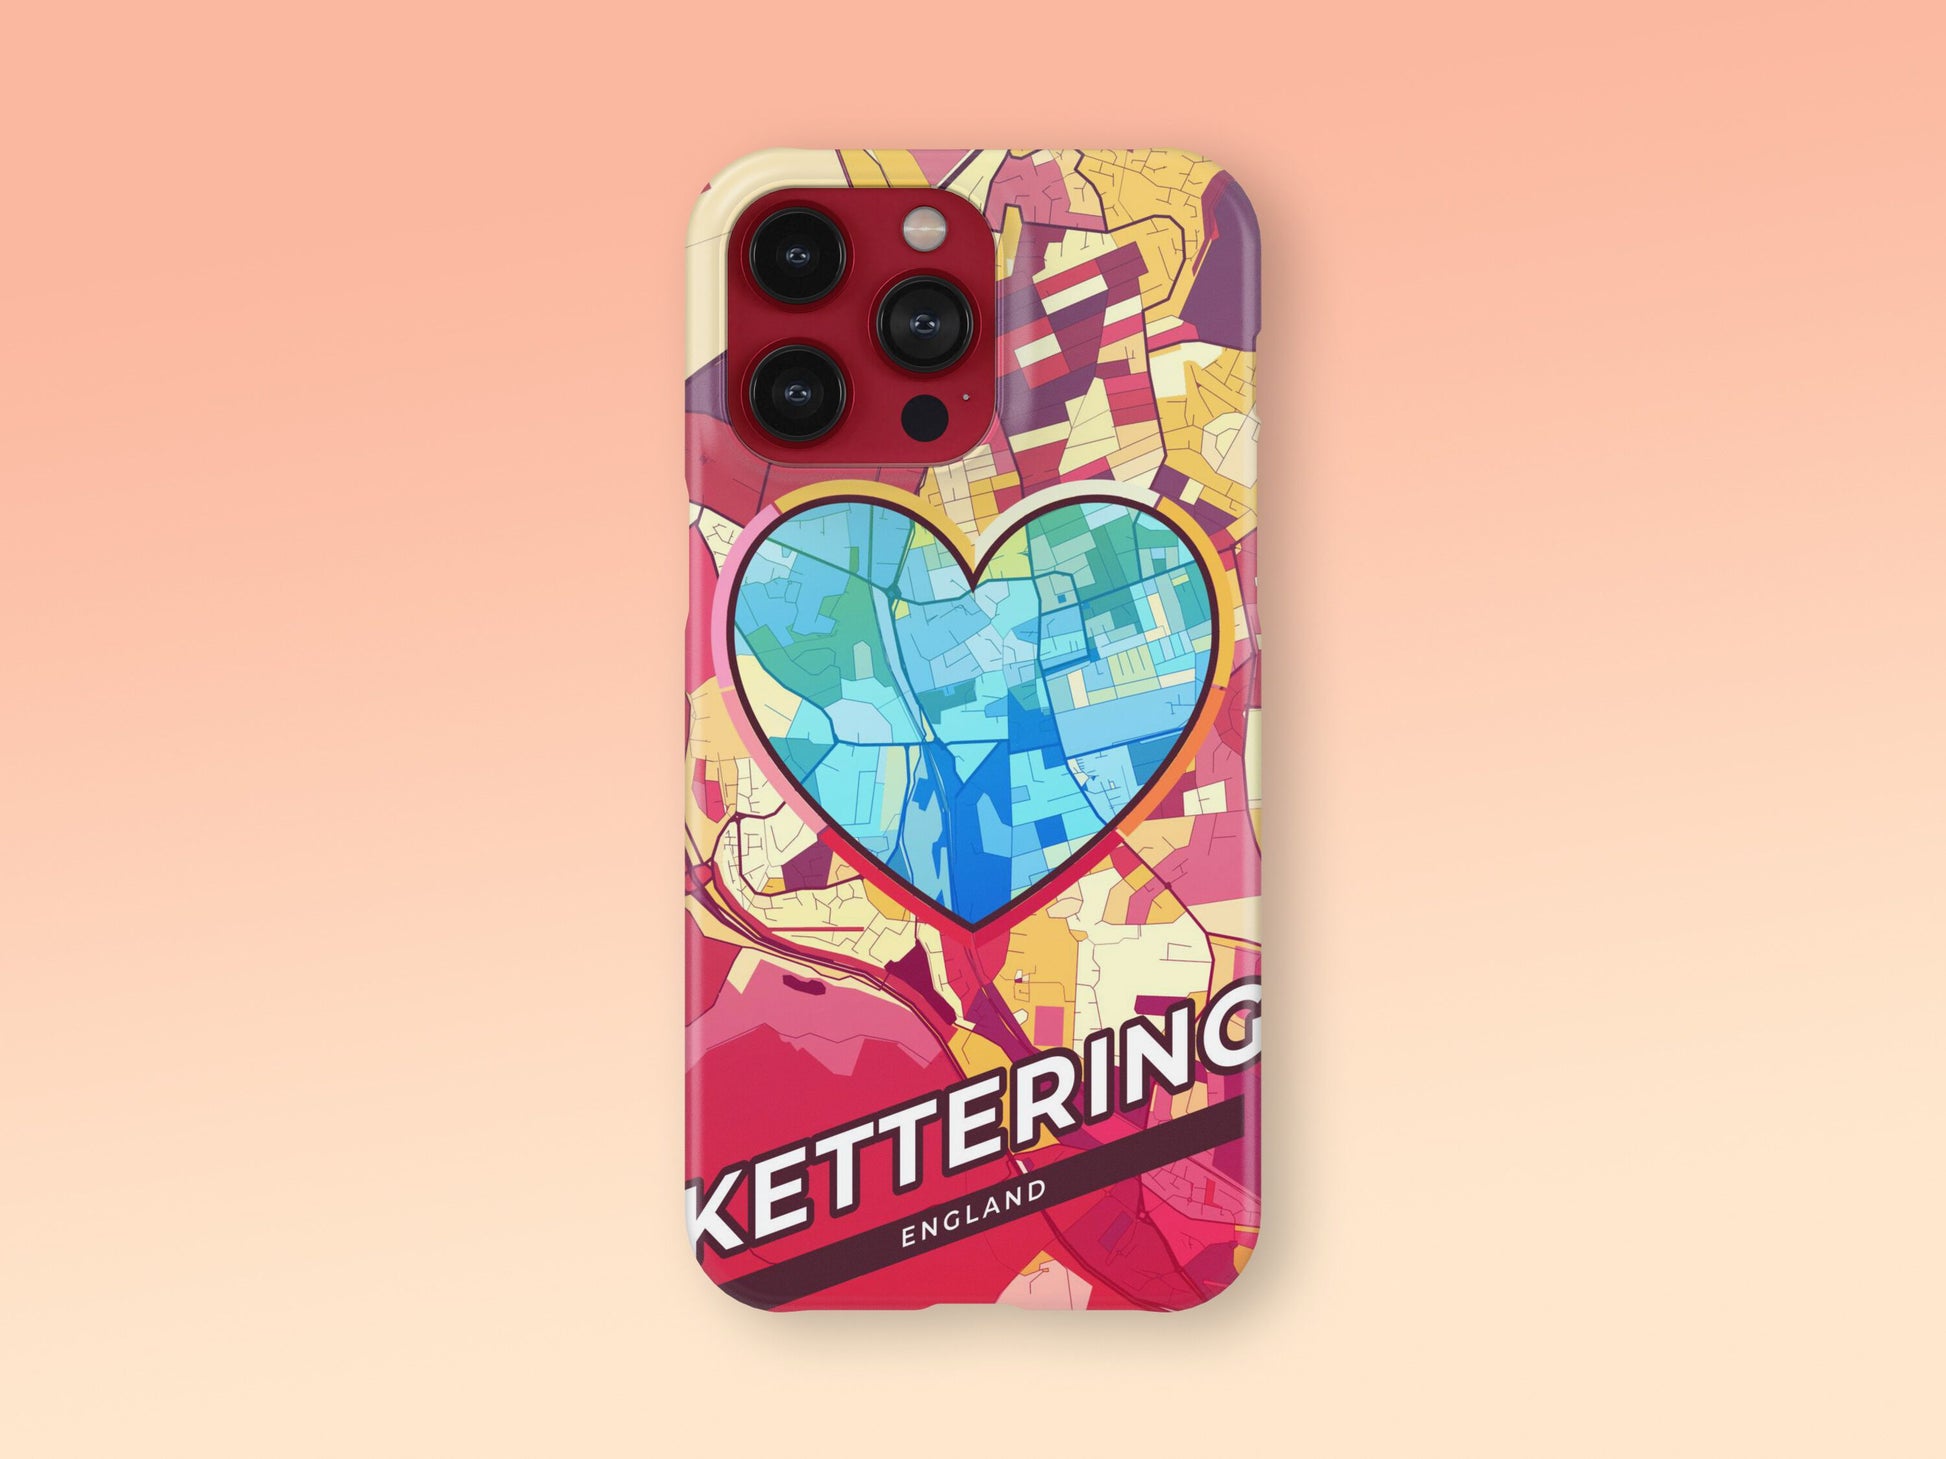 Kettering England slim phone case with colorful icon. Birthday, wedding or housewarming gift. Couple match cases. 2